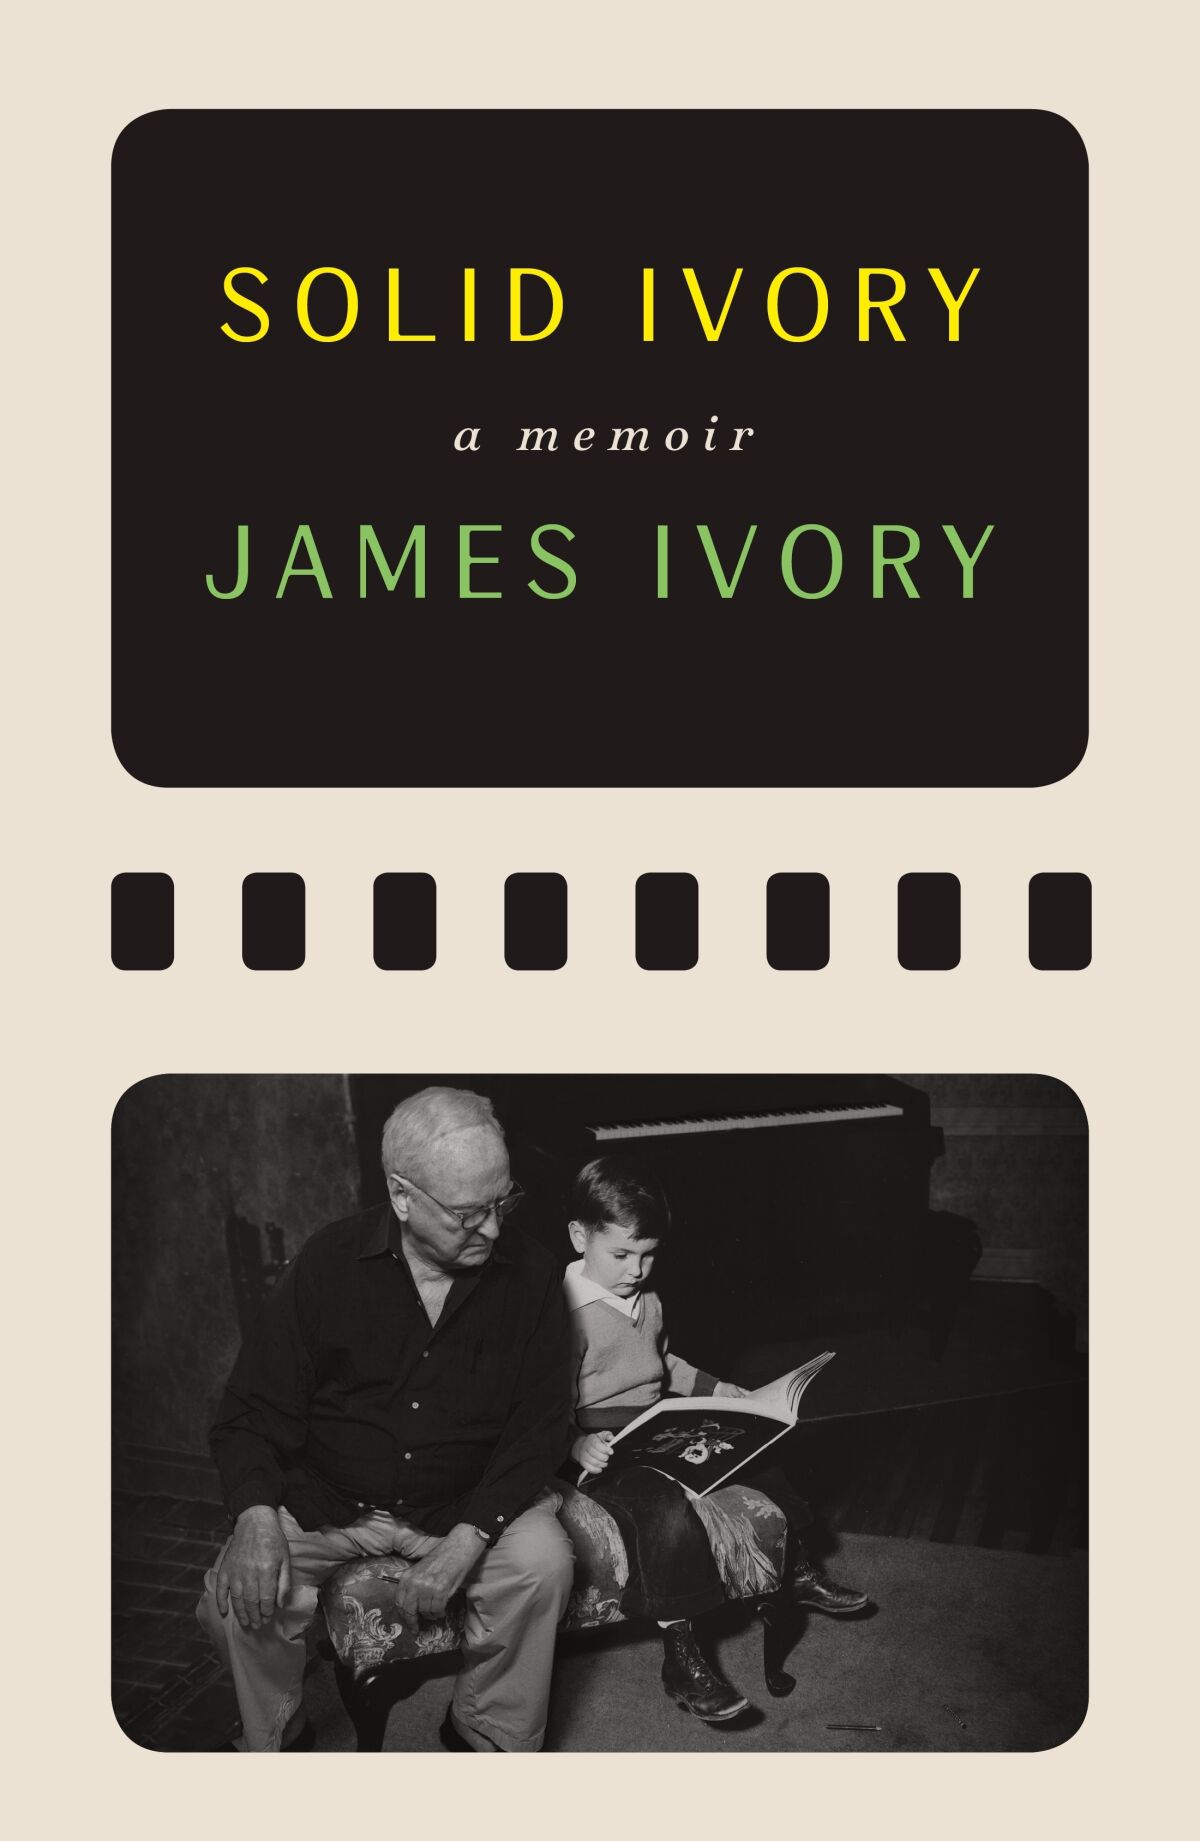 This cover image released by Farrar, Straus and Giroux shows "Solid Ivory" by James Ivory. (Farrar, Straus and Giroux via AP)